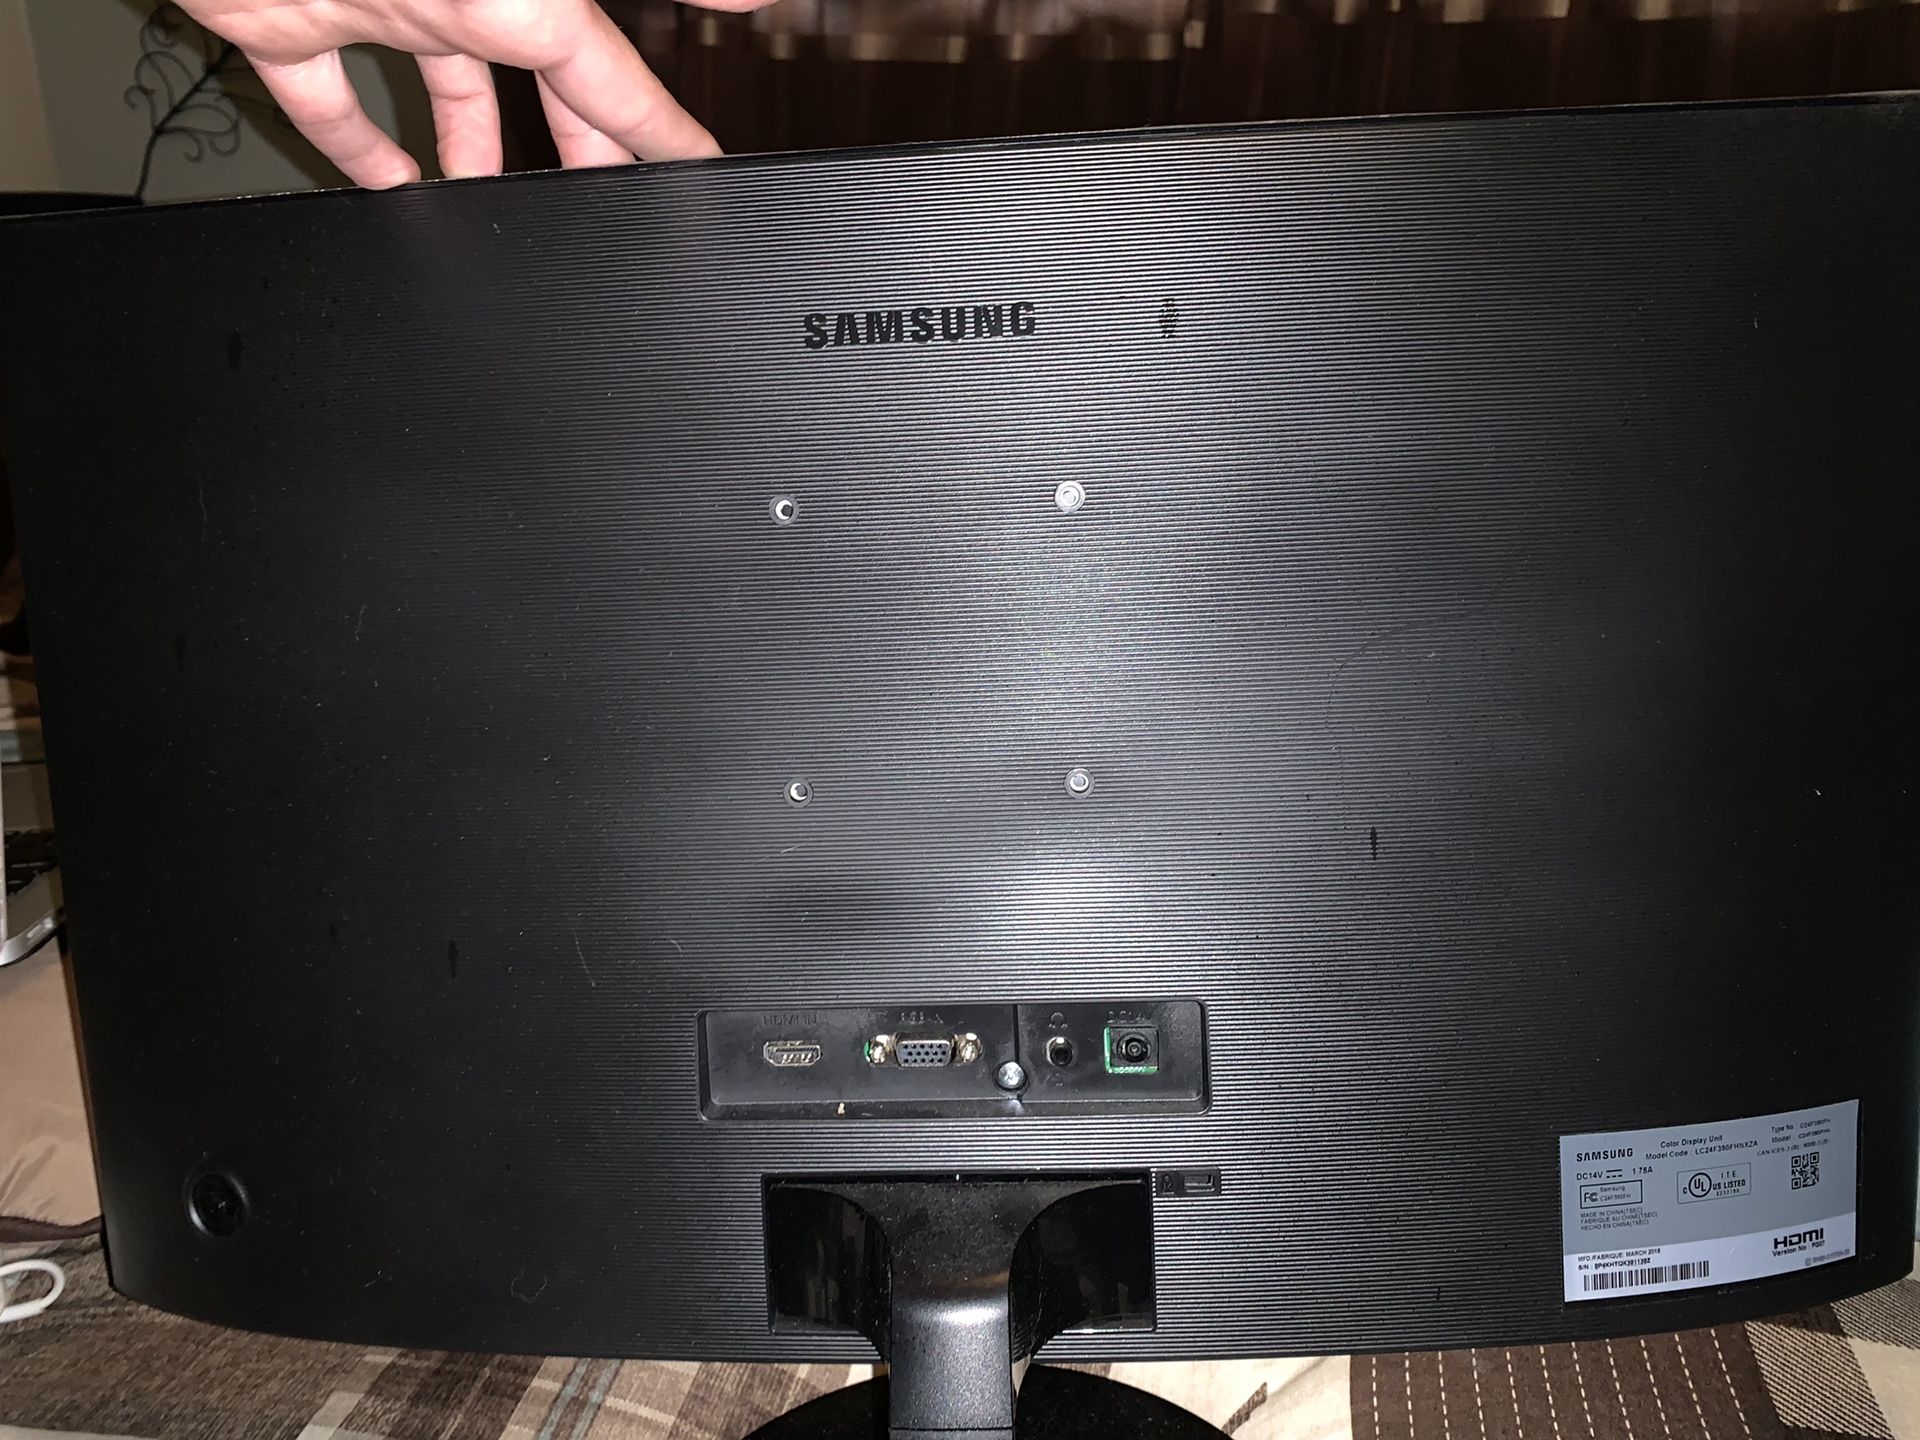 Samsung curved LED Monitor